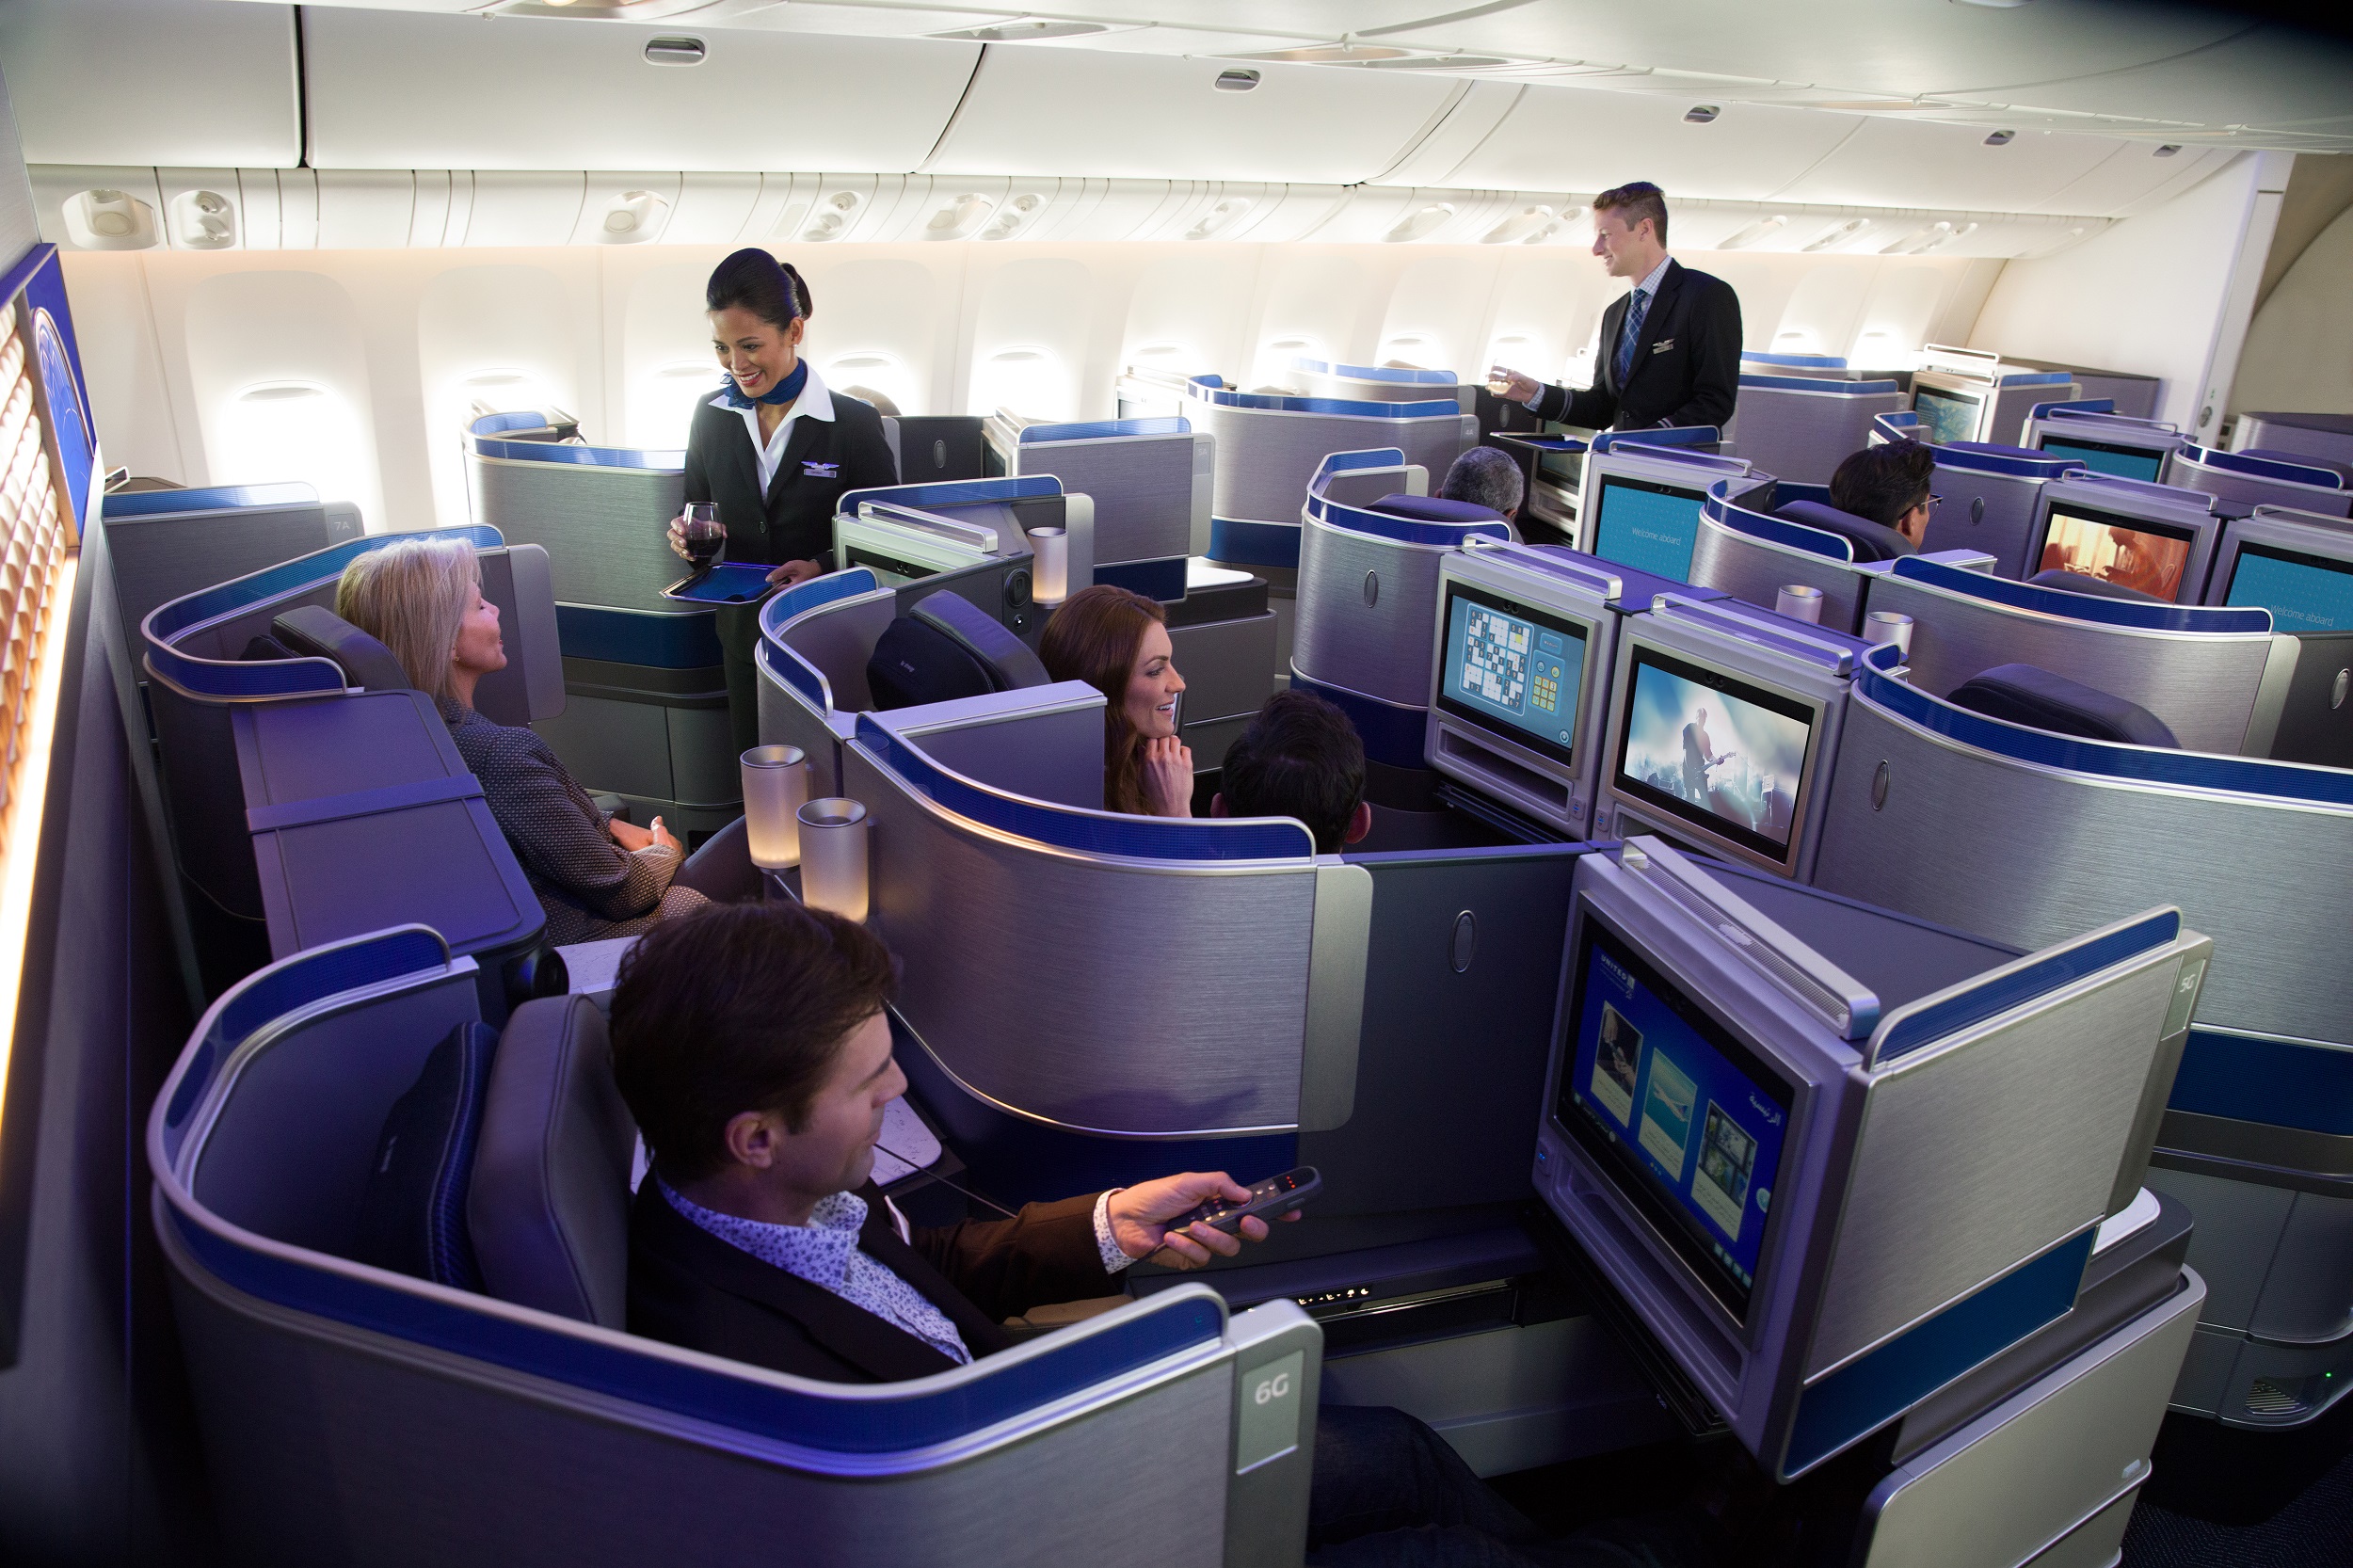 a group of people sitting in chairs in an airplane